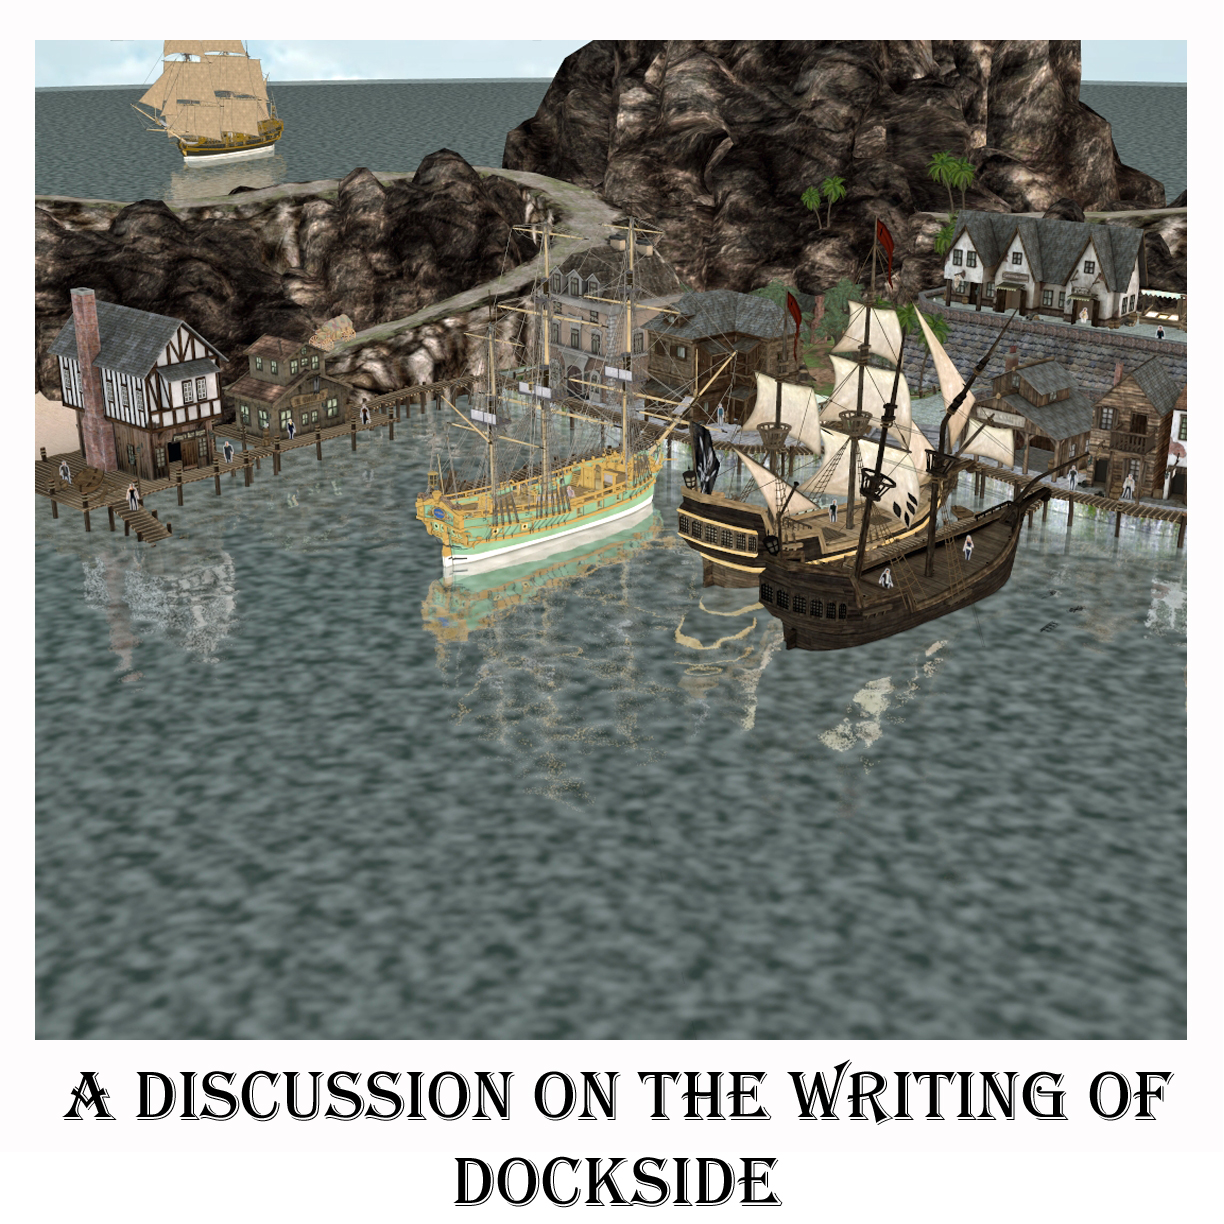 A Discussion on the Writing of Dockside